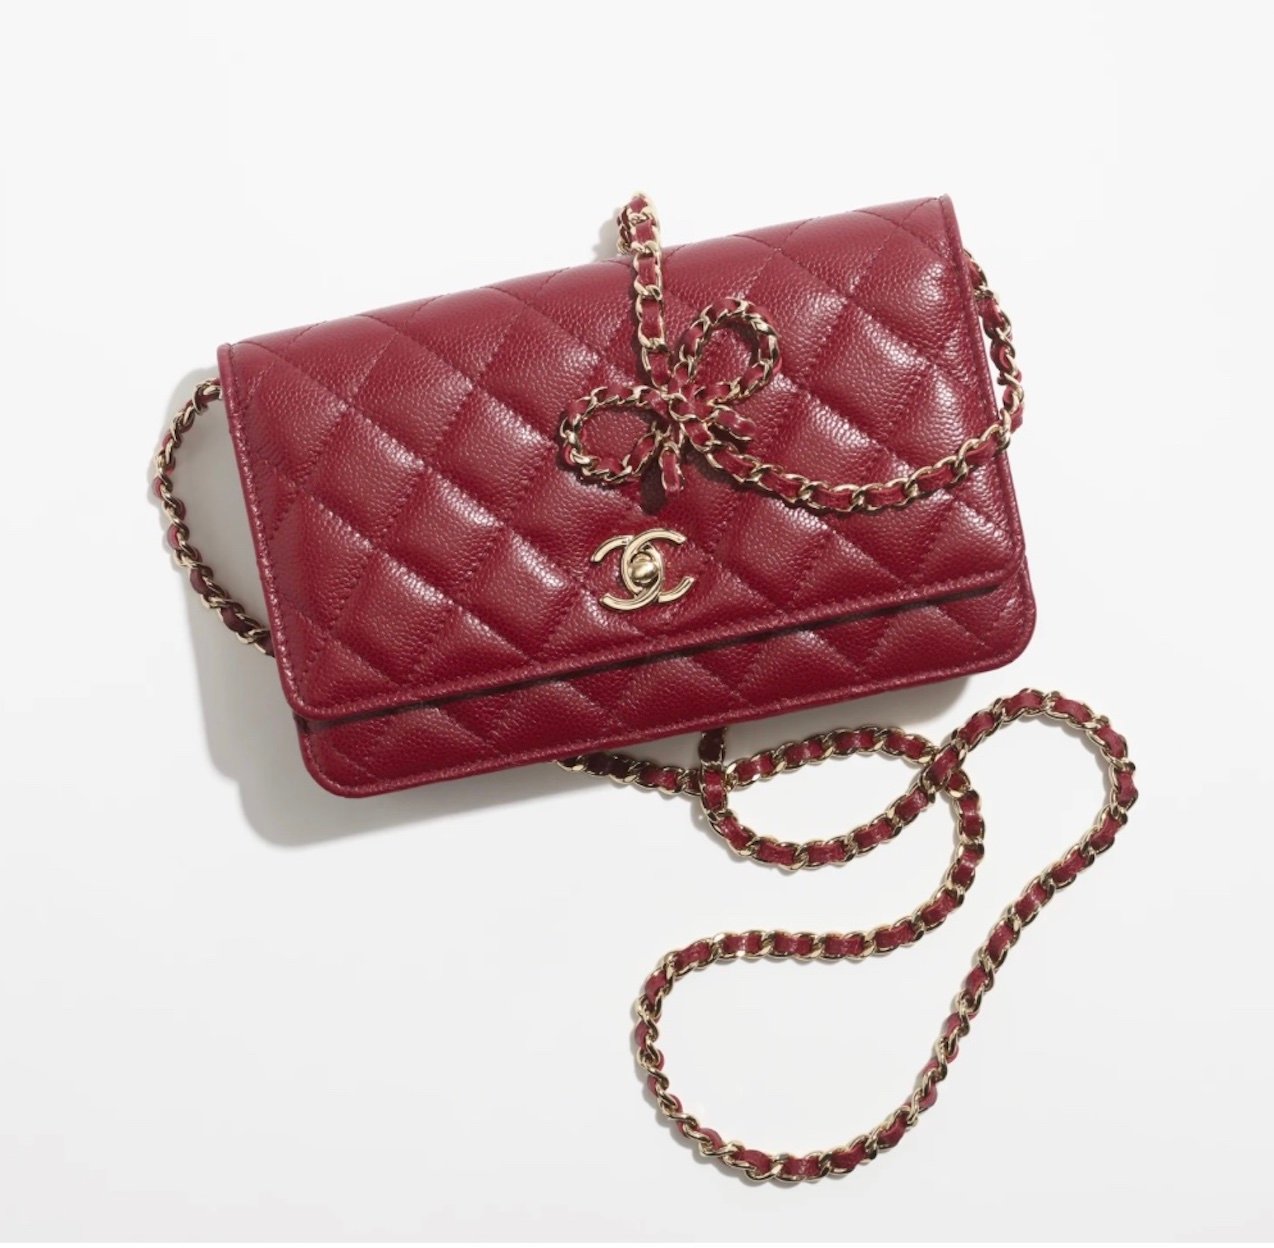 CHANEL BAGS & WALLETS : $5K-10K$ / TAKE YOUR PICK FROM THE CHANEL